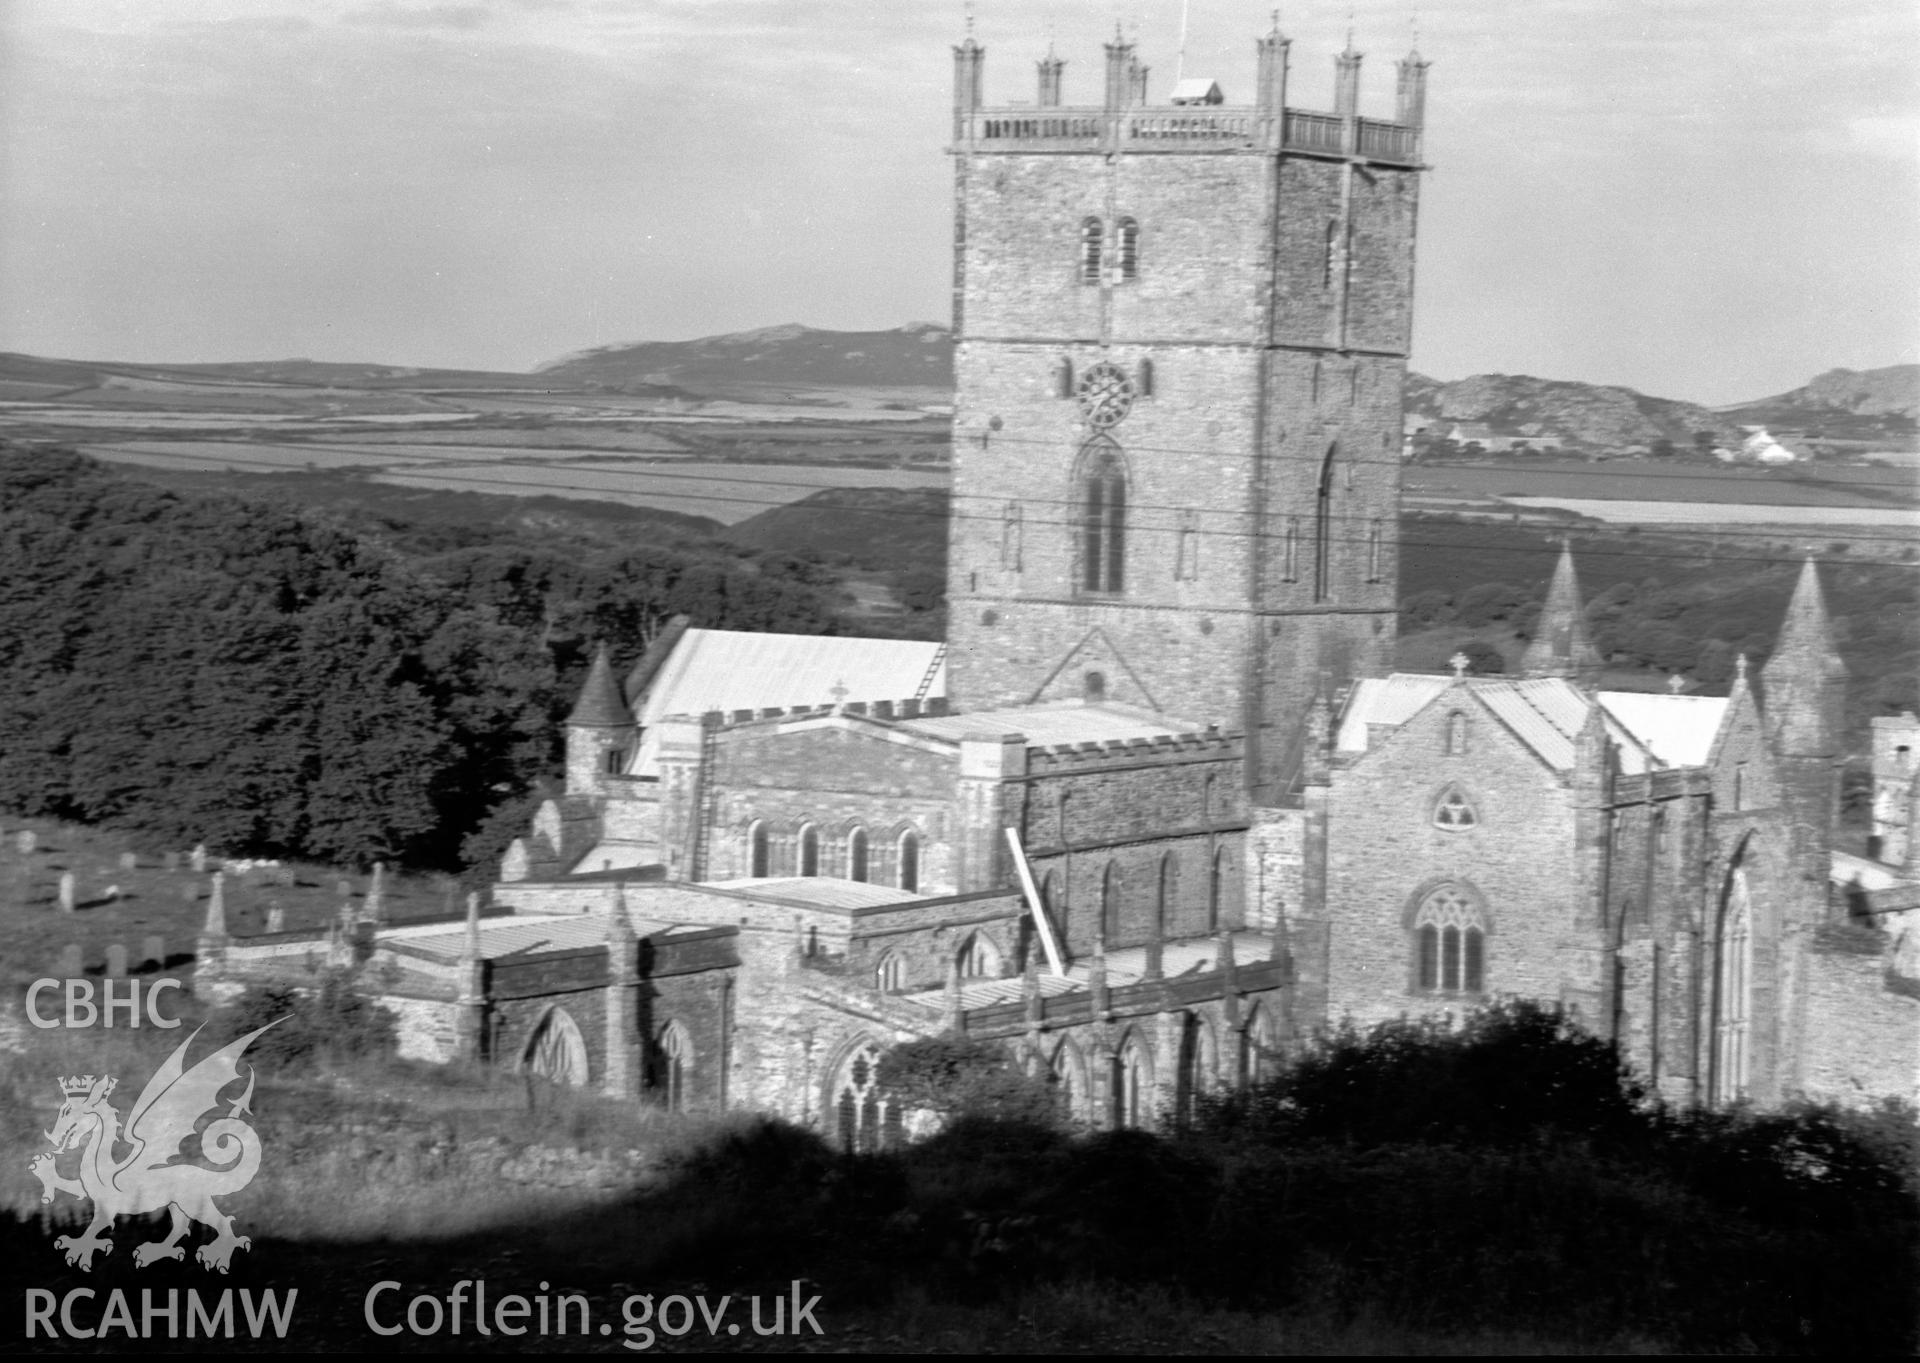 Digital copy of a black and white acetate negative showing exterior view of St. David's Cathedral, taken by E.W. Lovegrove, July 1936.